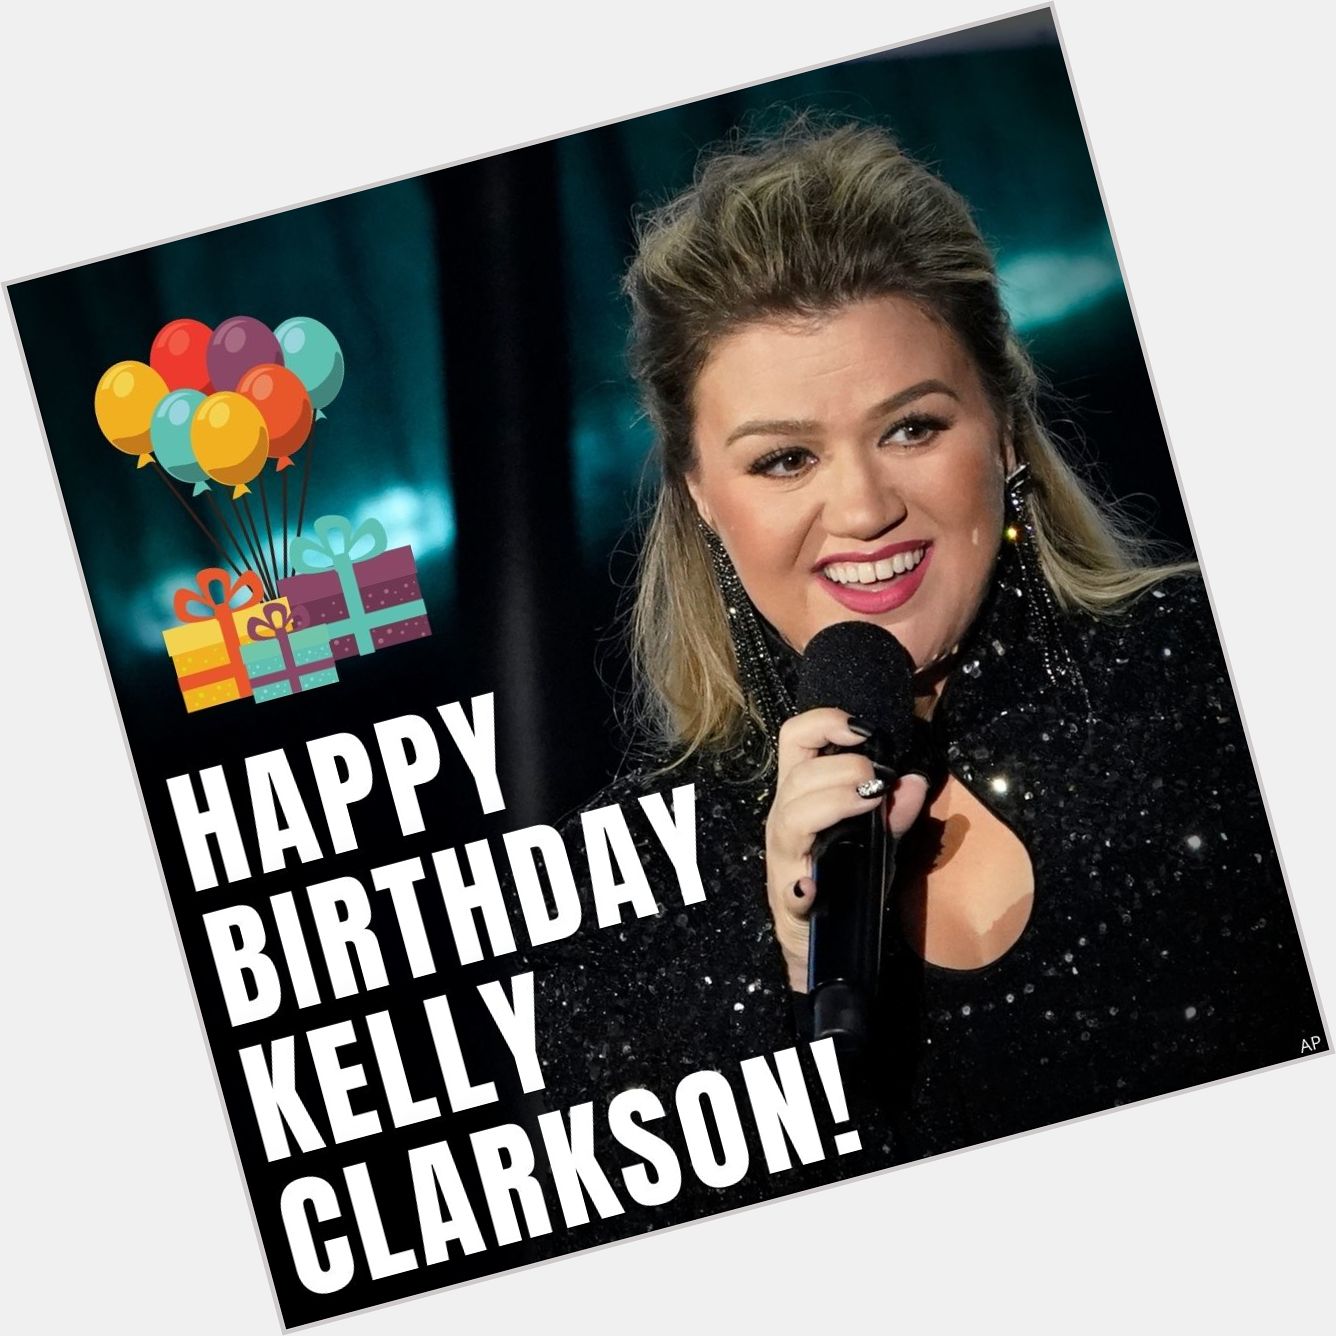 Happy birthday Kelly Clarkson!

Join us in wishing the singer a happy 39th birthday! 